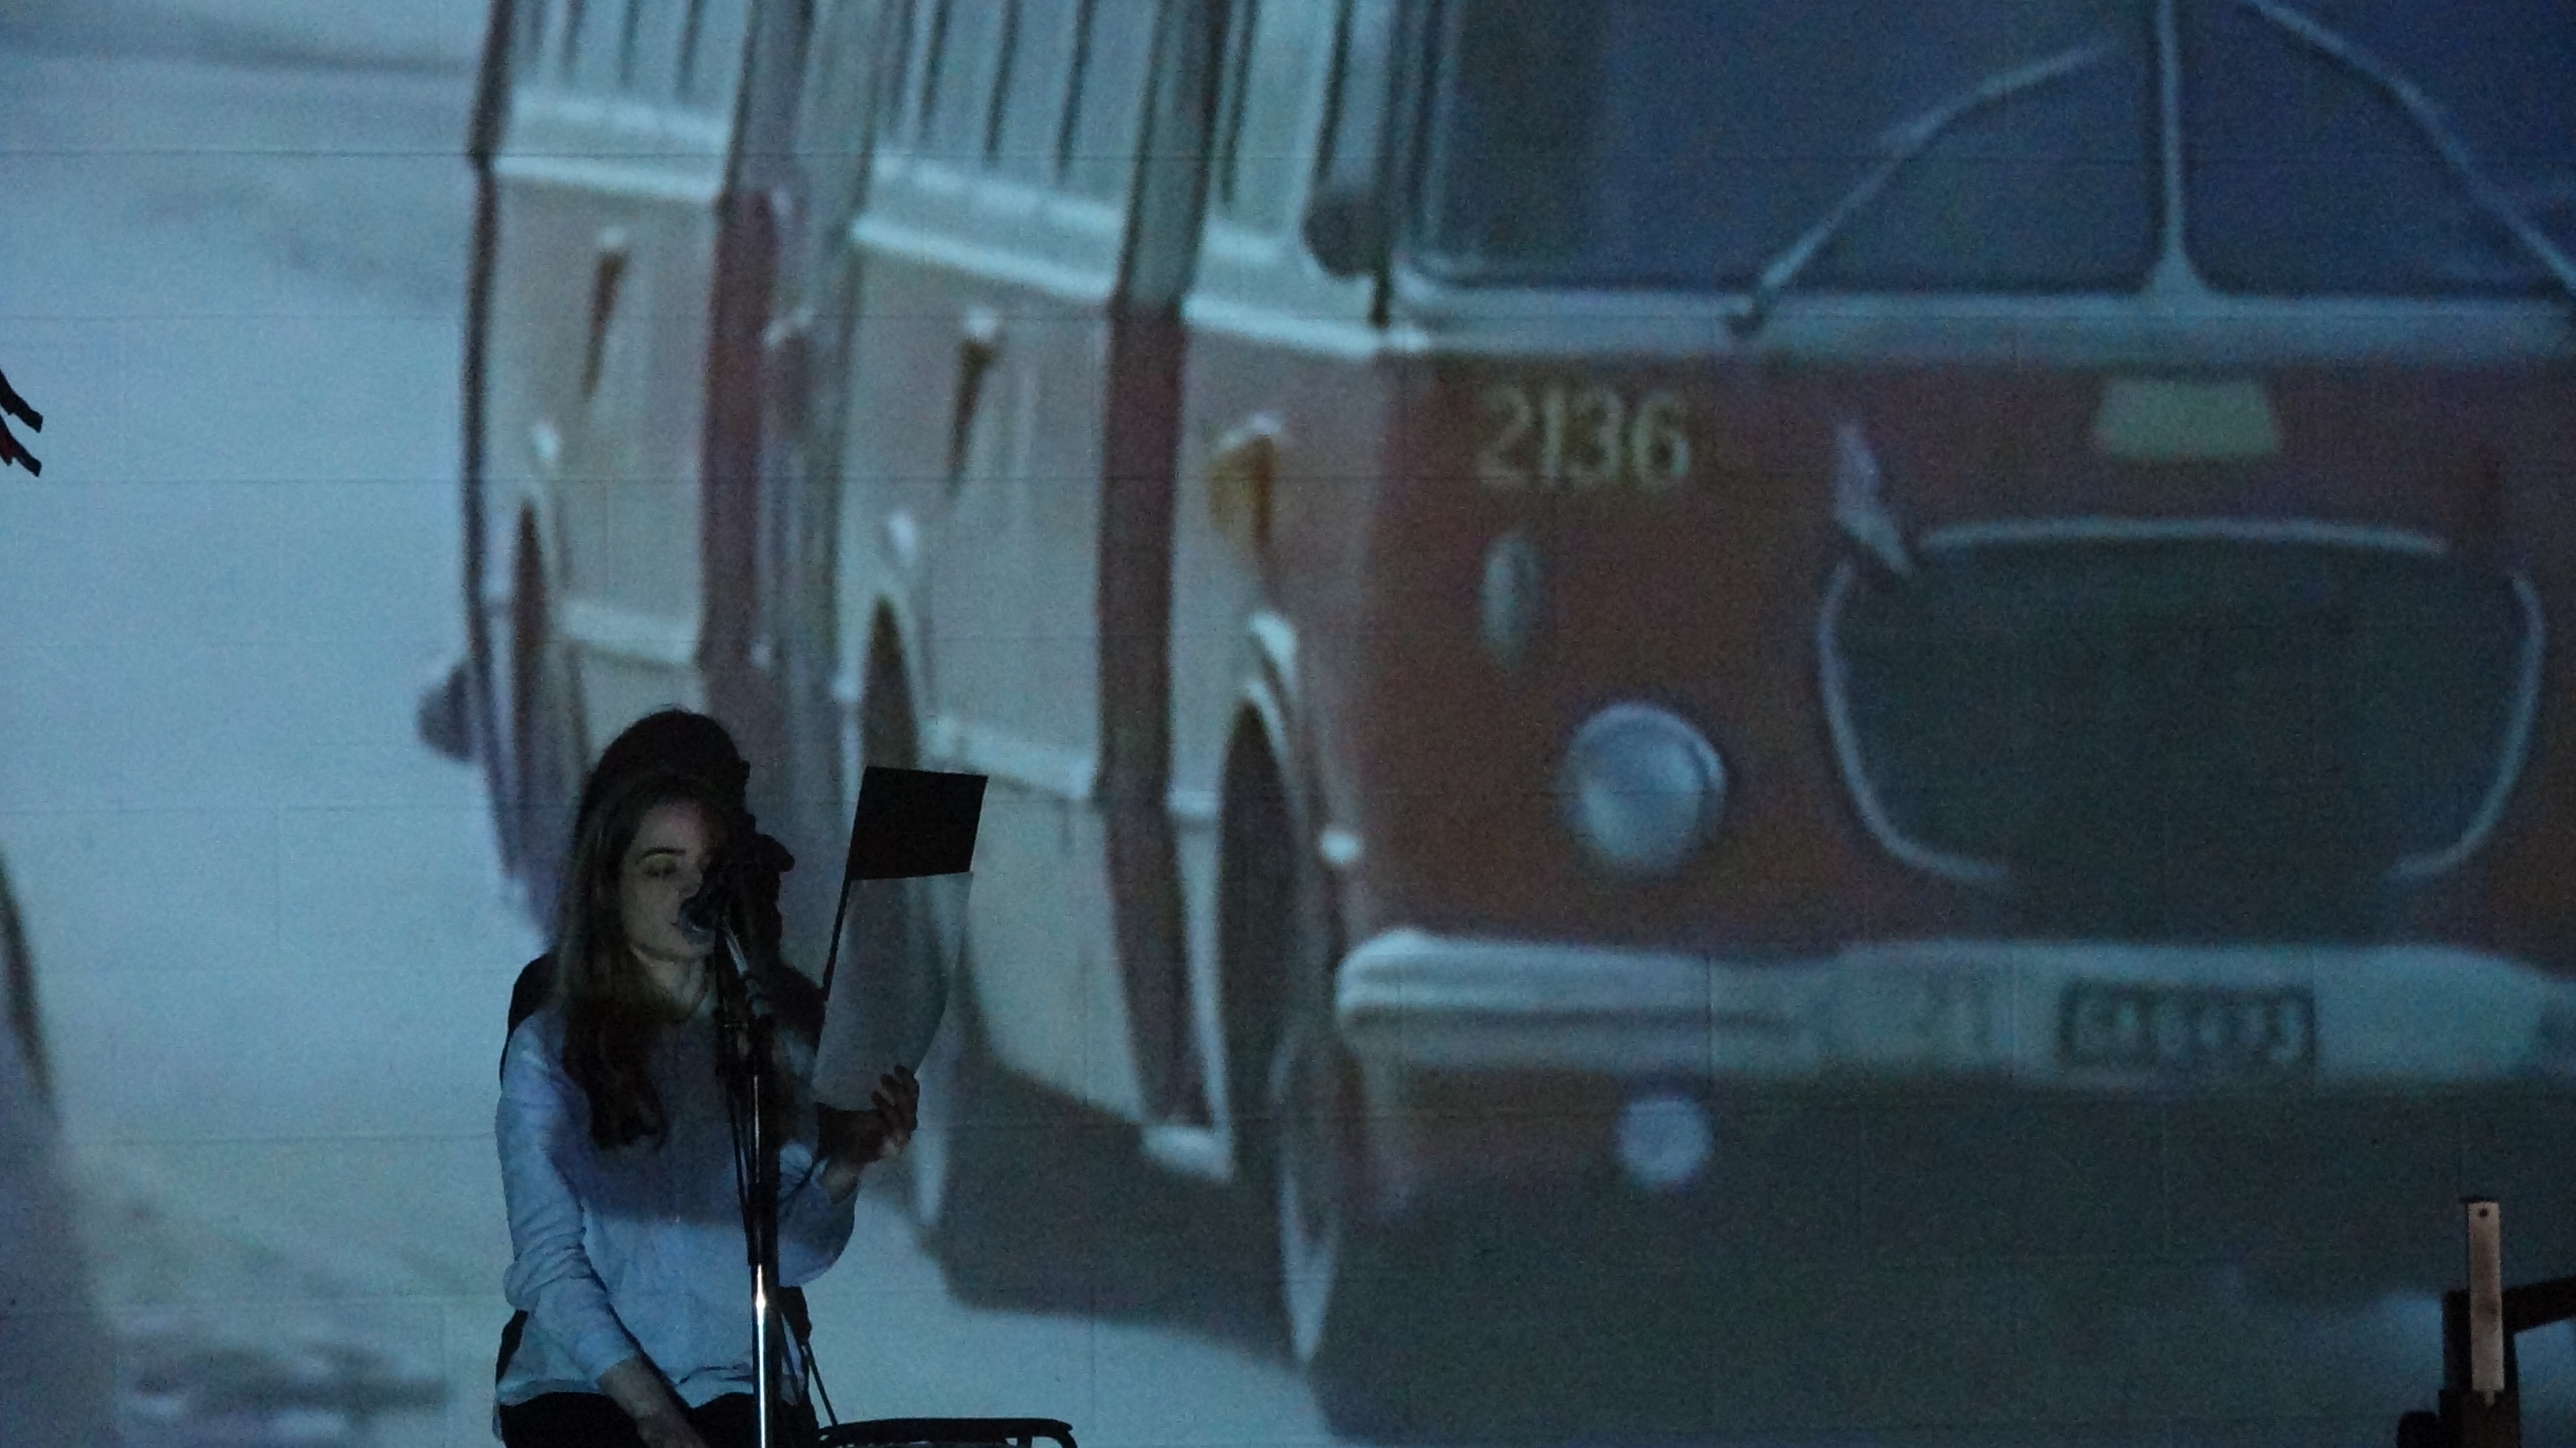 performer reading a script in front of a projection of a red, vintage bus.